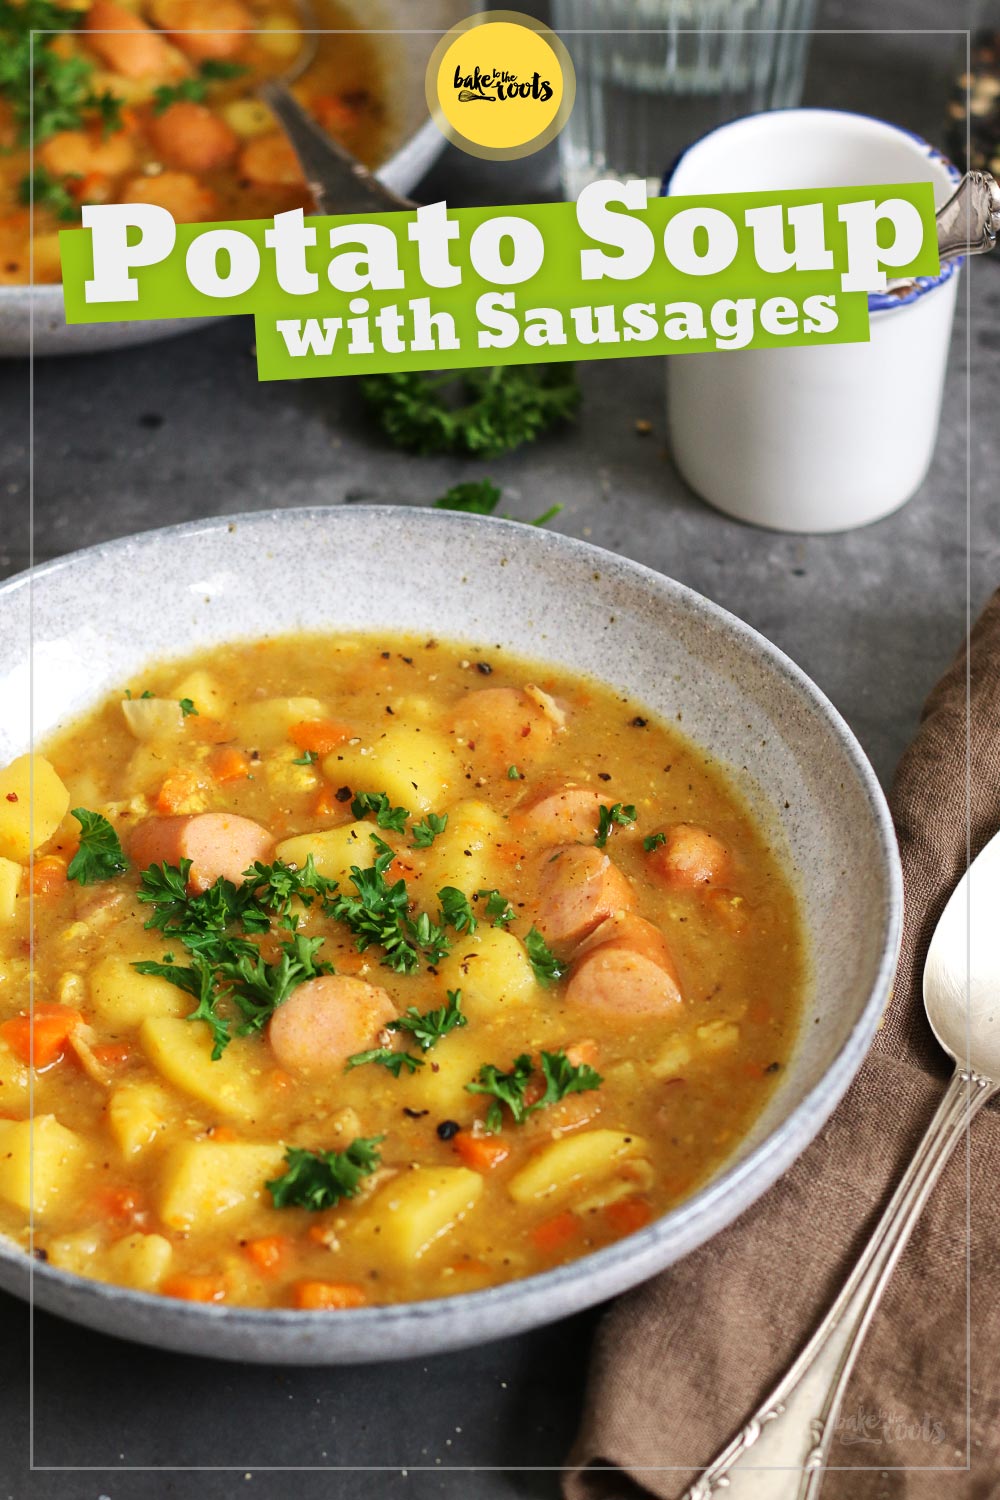 Easy Potato Soup with Sausages (Wieners) | Bake to the roots